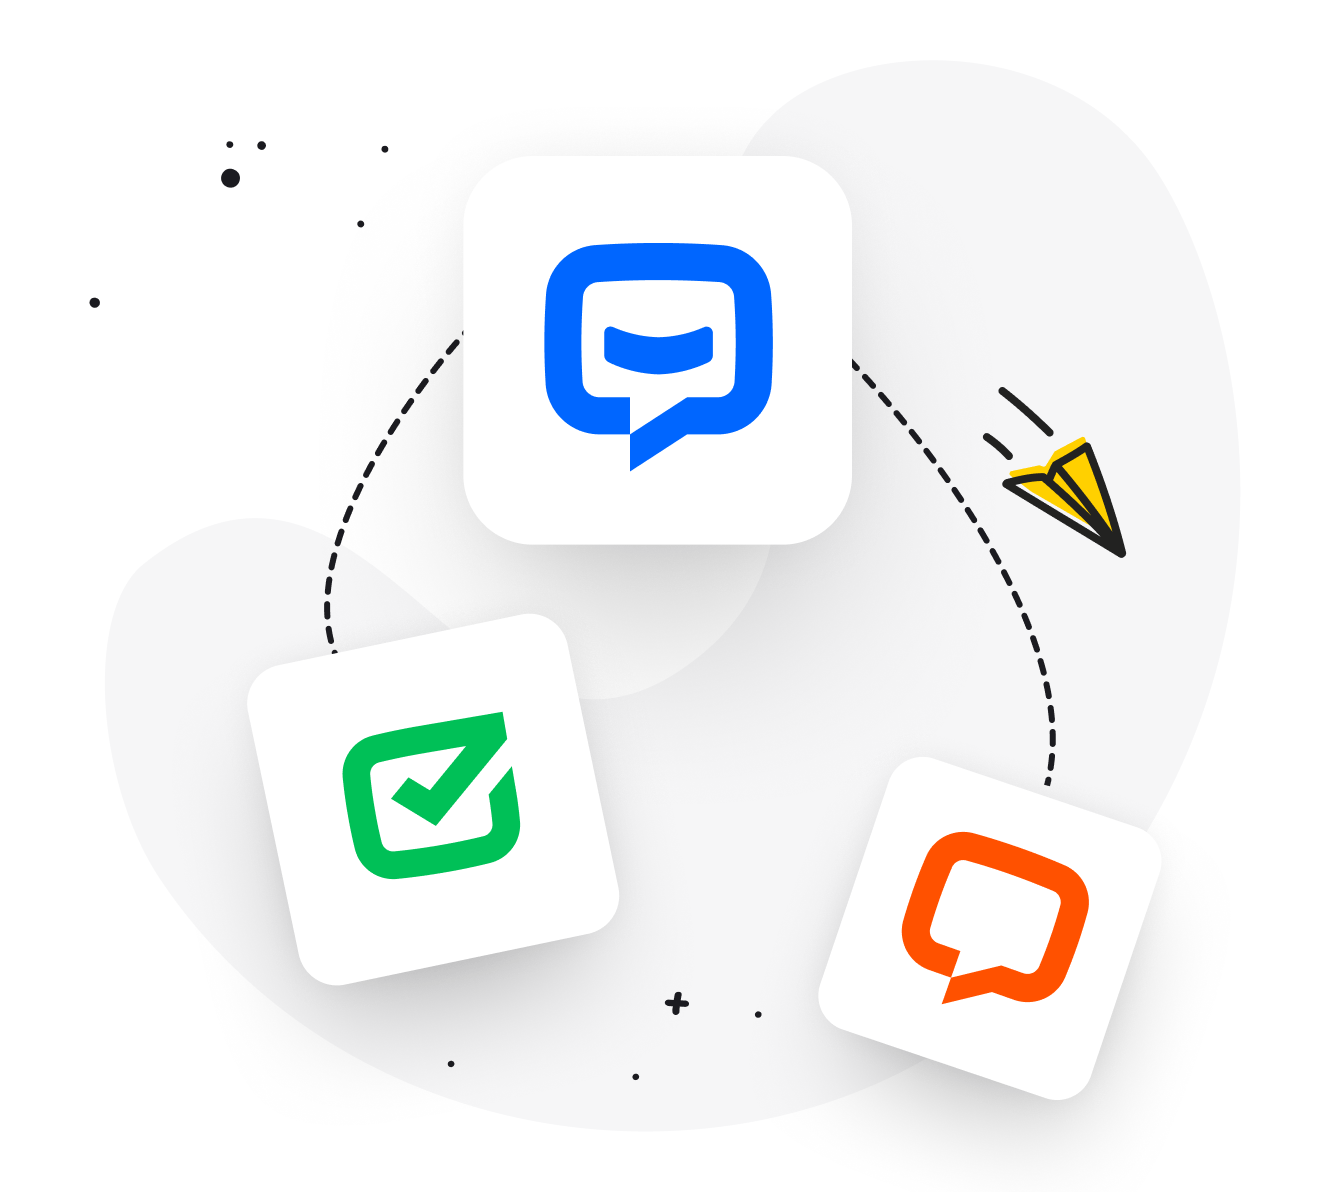 Logos of LiveChat, ChatBot, and HelpDesk